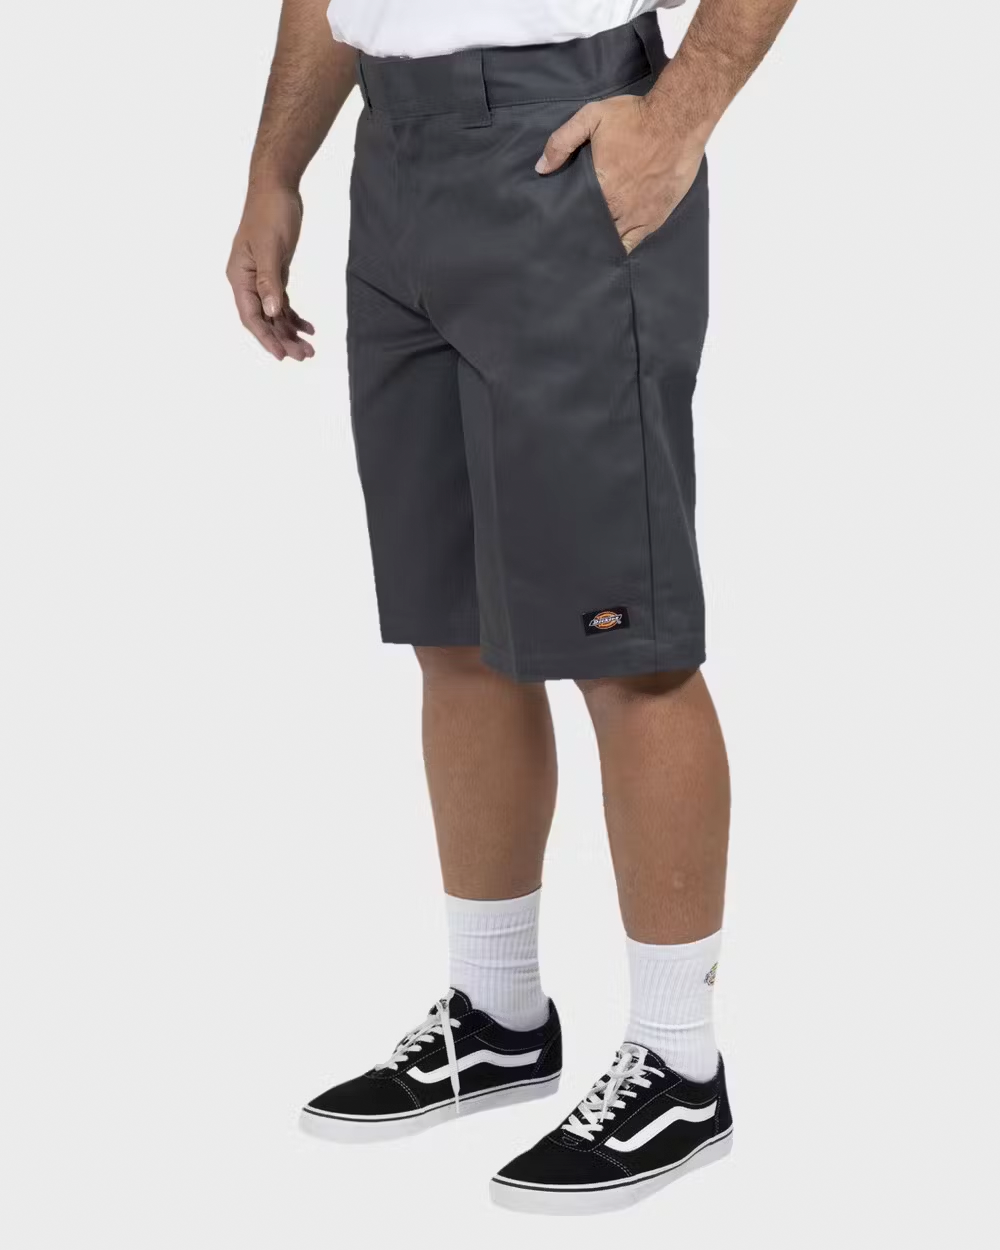 DICKIES 131 Slim Straight Fit Shorts - Charcoal - VENUE.